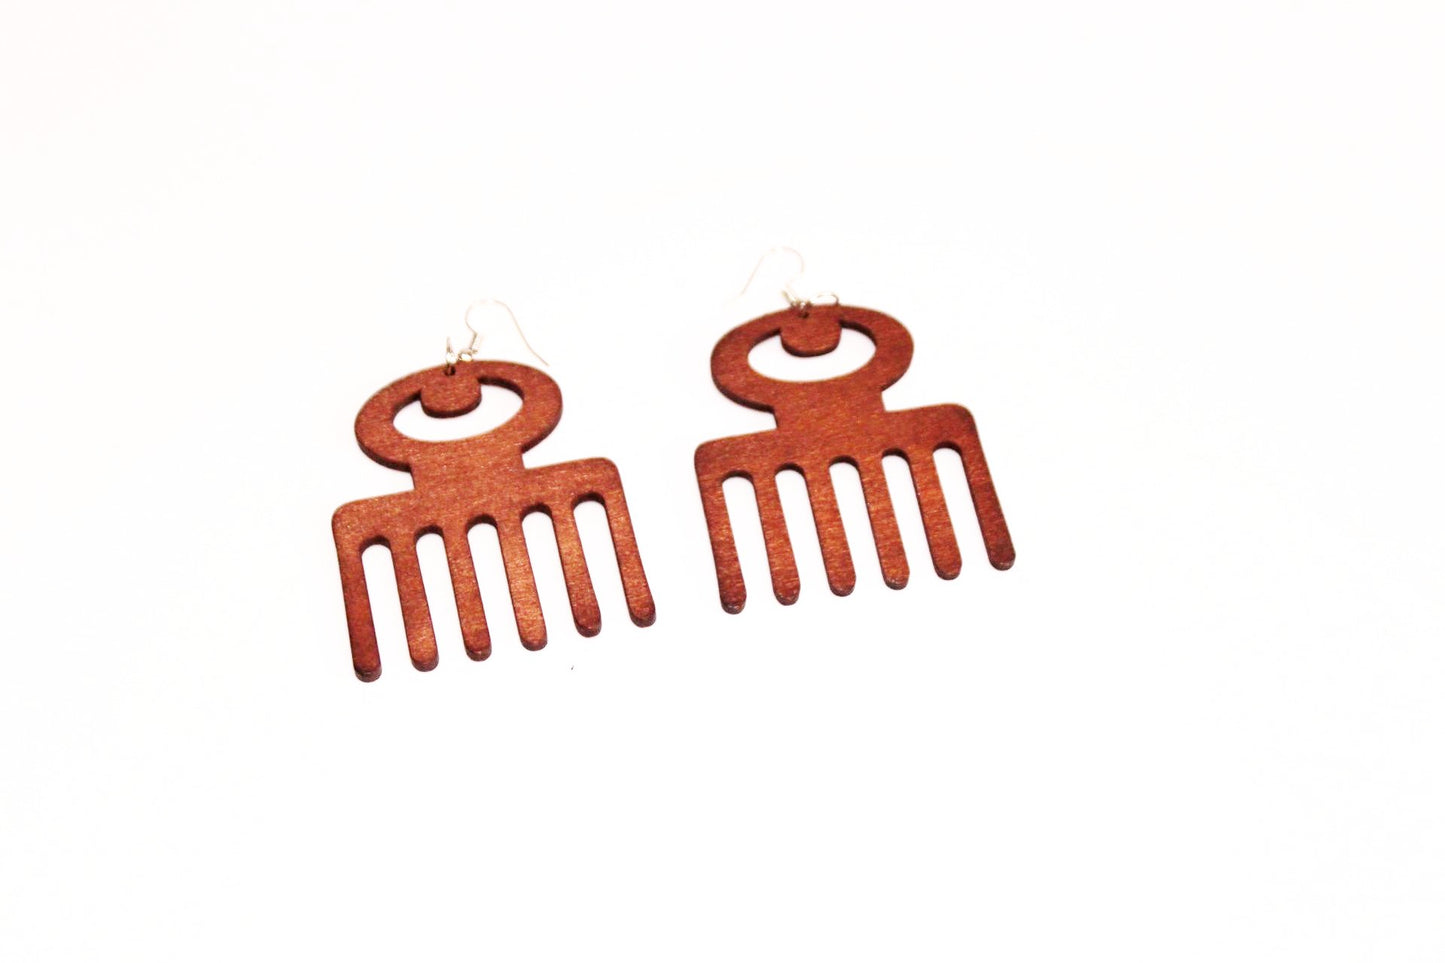 Afro comb wooden- earrings